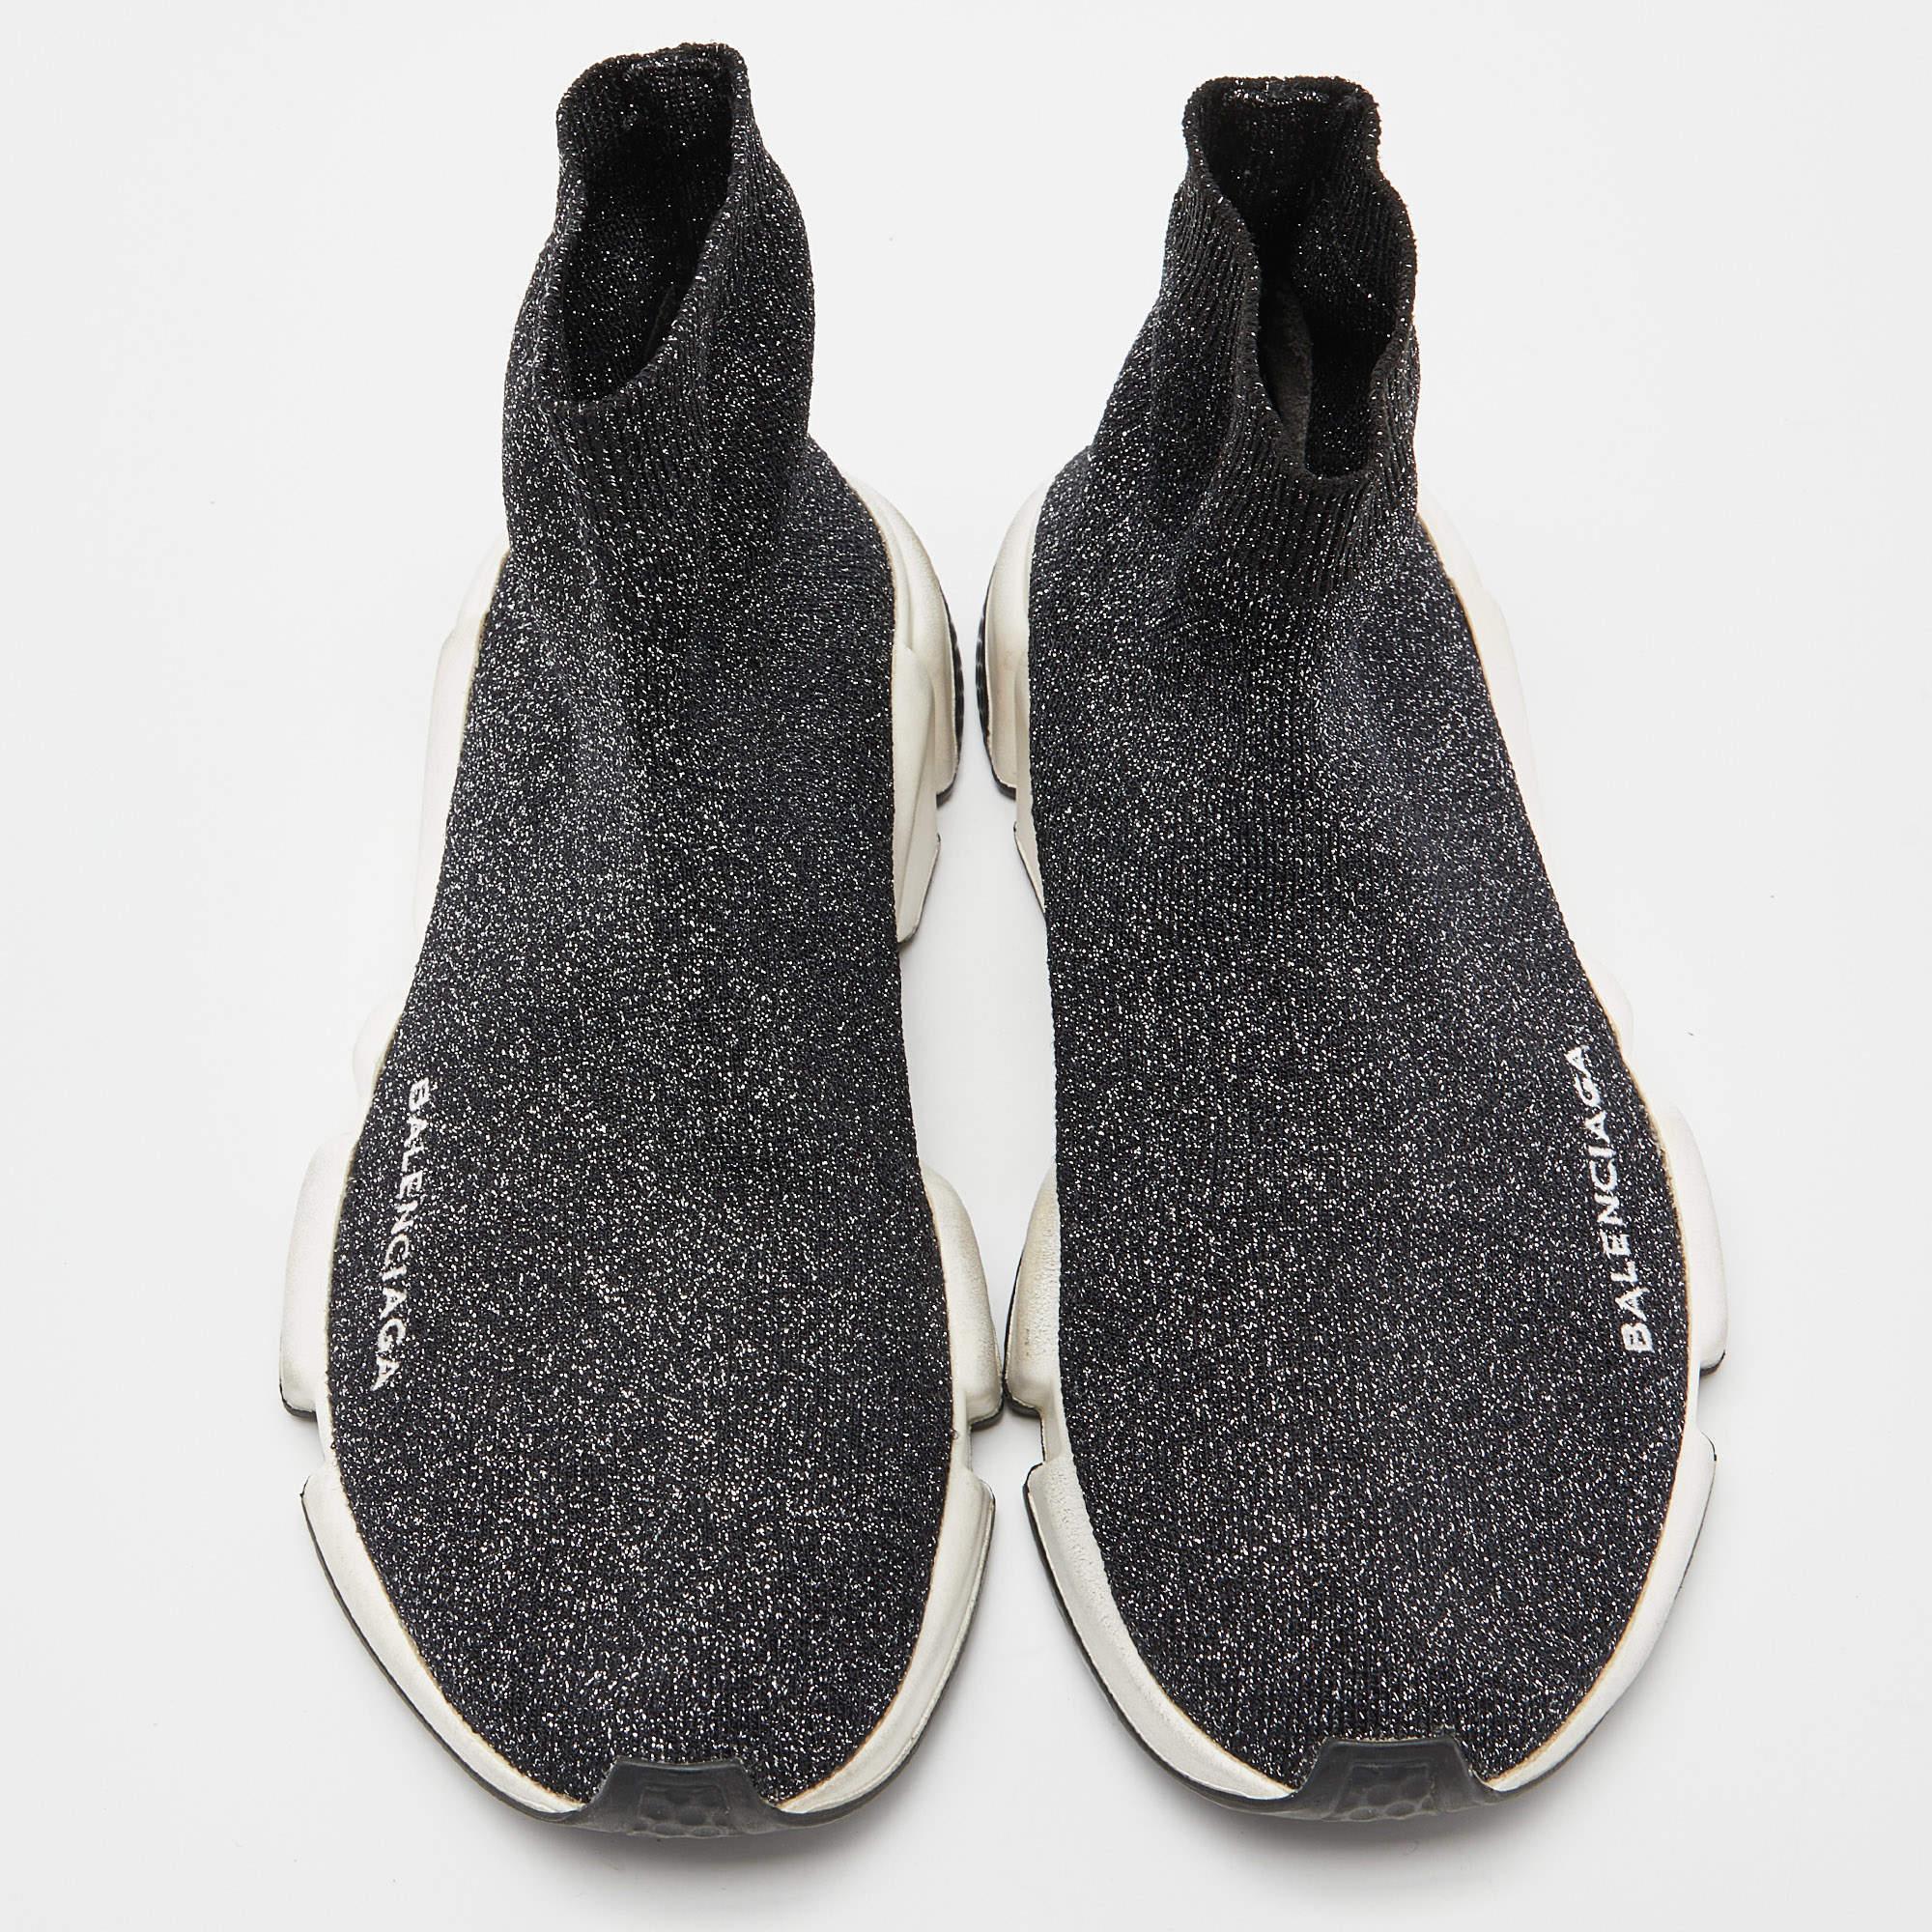 Balenciaga Shimmery Black Knit Fabric Speed Trainer Sneakers Size 38 For Sale 2